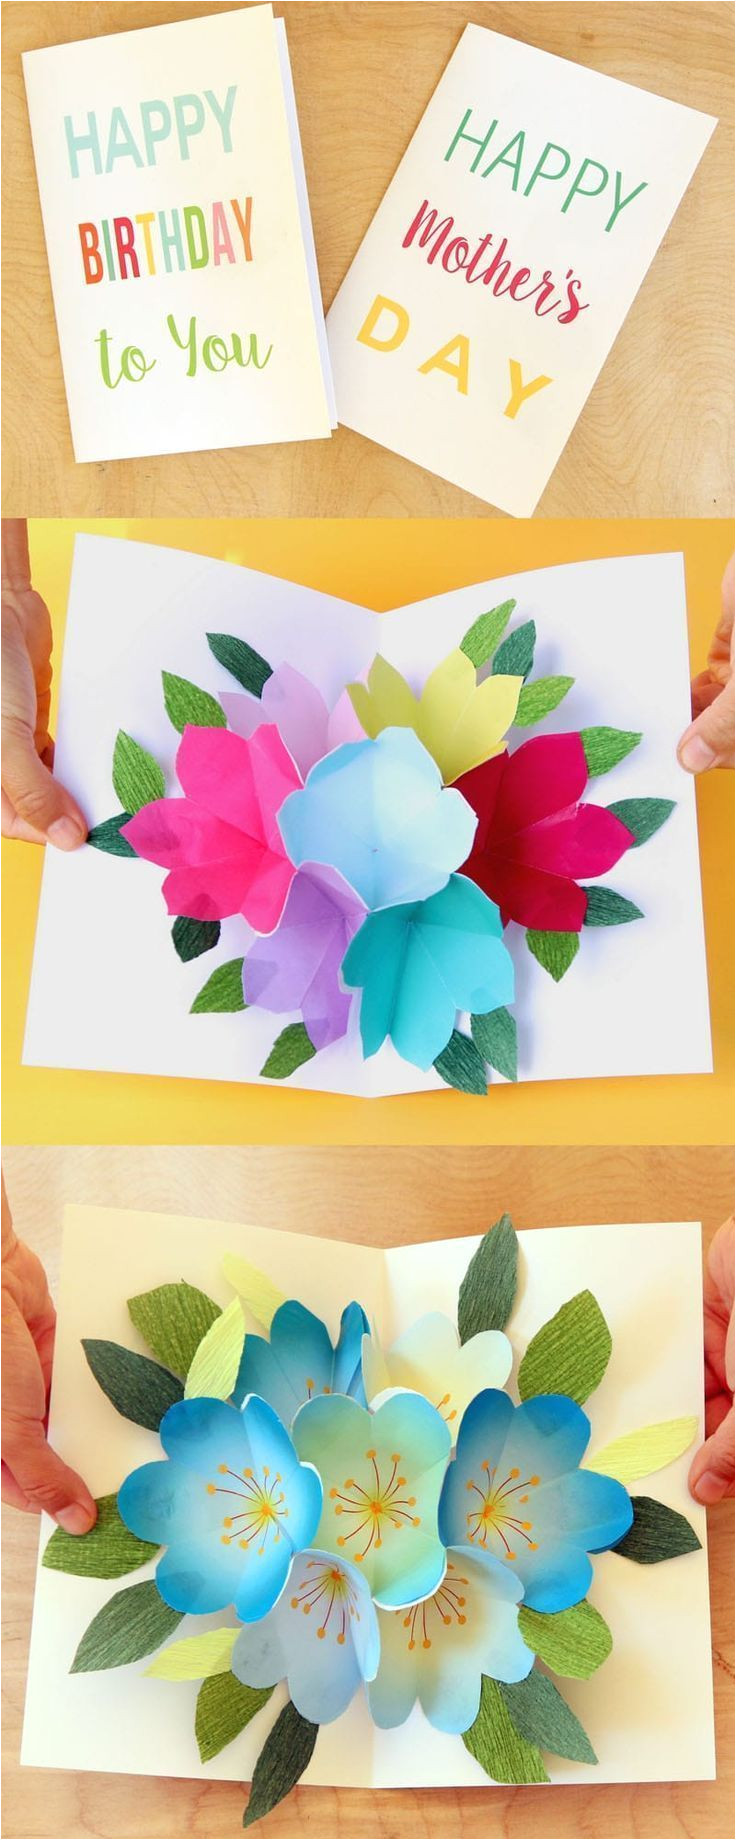 Simple Pop Up Birthday Card Free Printable Happy Birthday Card with Pop Up Bouquet